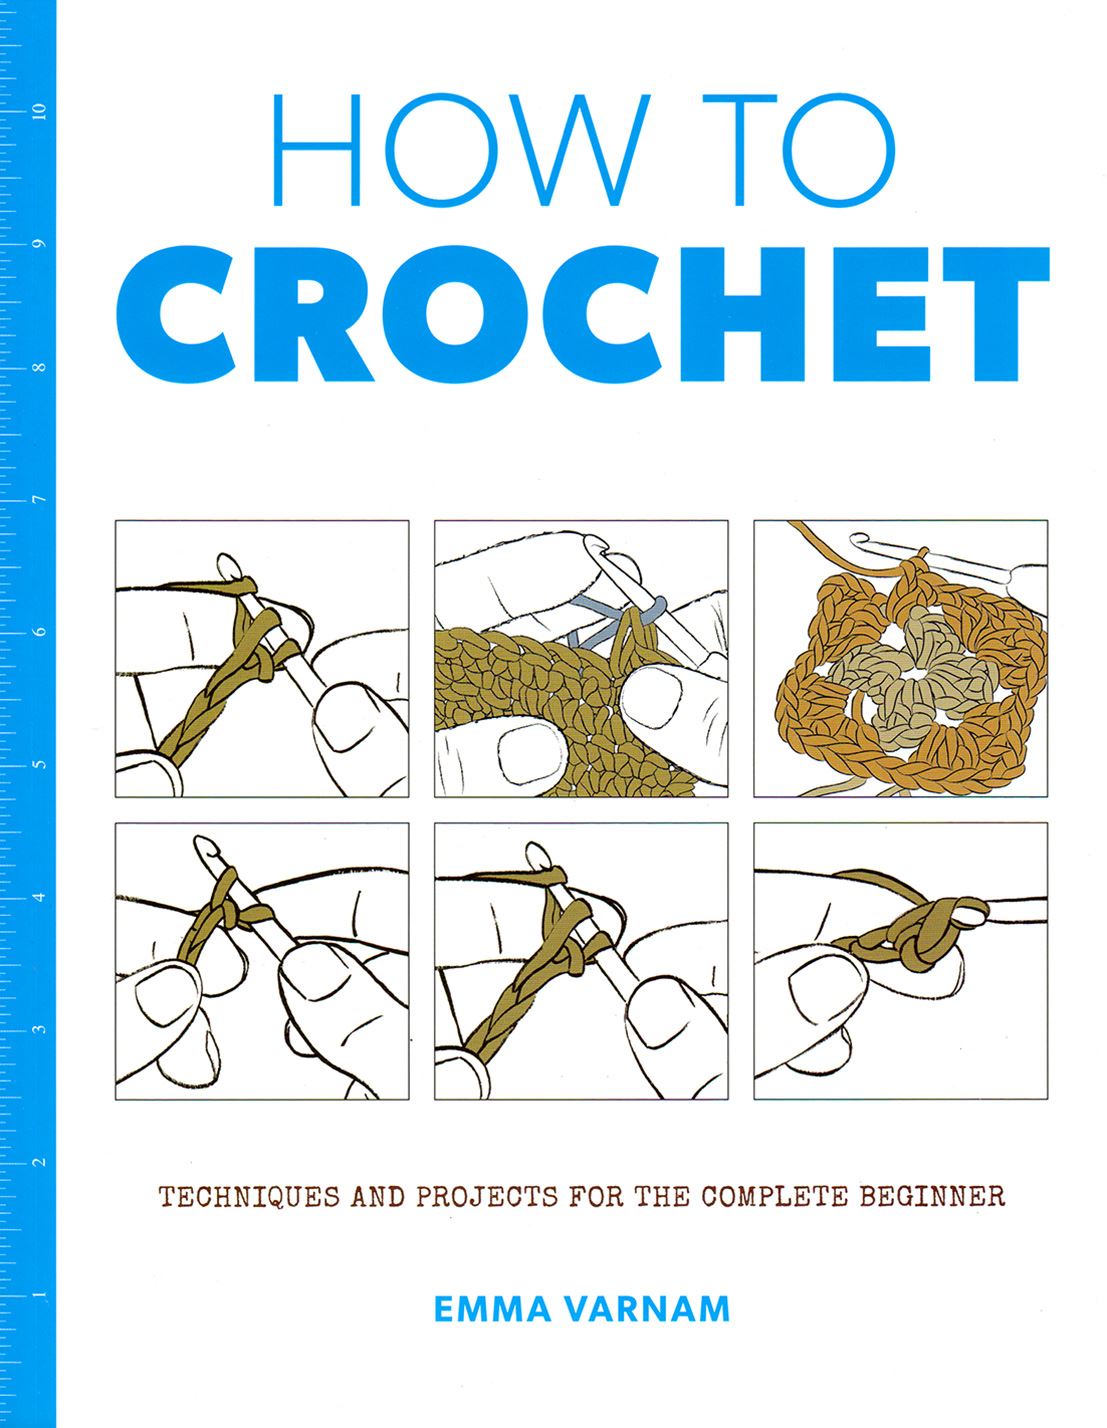 How to Crochet - Pattern Book by Emma Varnam